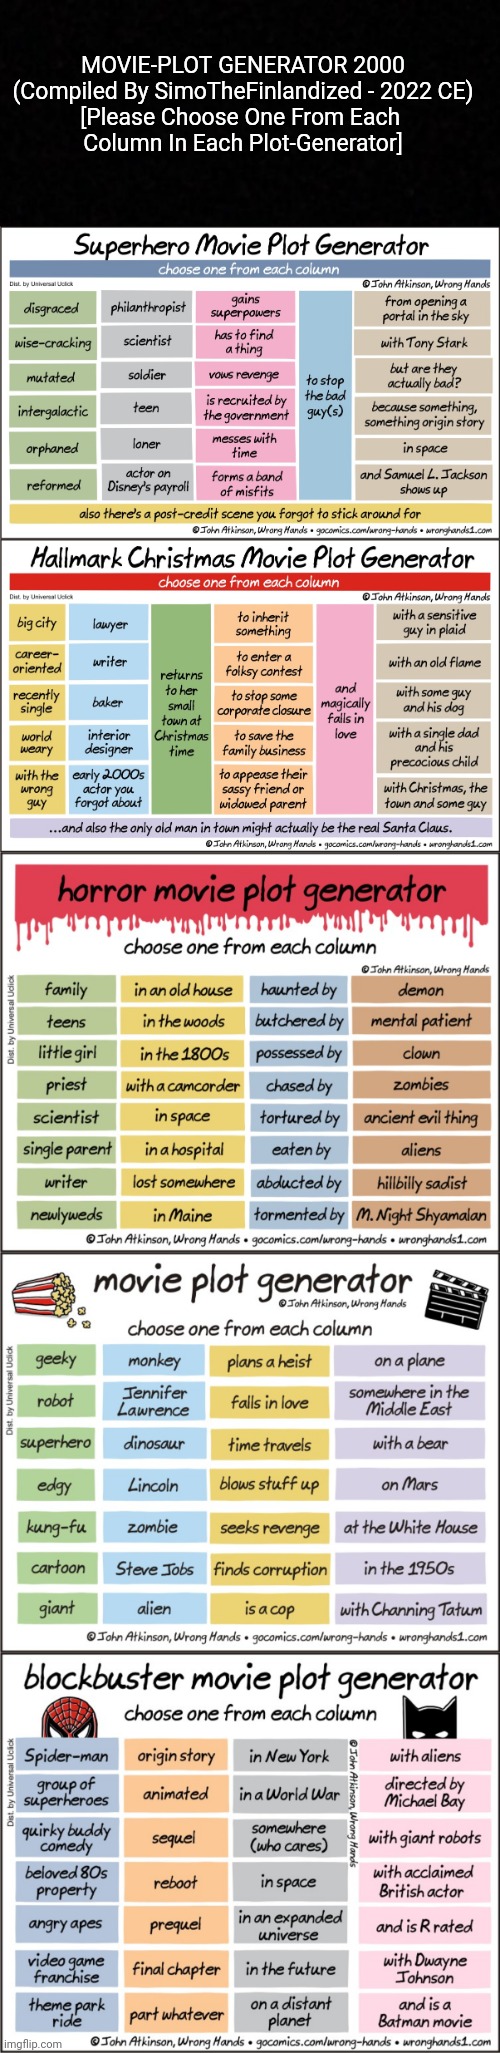 MOVIE-PLOT GENERATOR 2000 (Compiled By SimoTheFinlandized - 2022 CE) | MOVIE-PLOT GENERATOR 2000
(Compiled By SimoTheFinlandized - 2022 CE)
[Please Choose One From Each 
Column In Each Plot-Generator] | image tagged in simothefinlandized,plot generator,movies,infographics,creativity | made w/ Imgflip meme maker